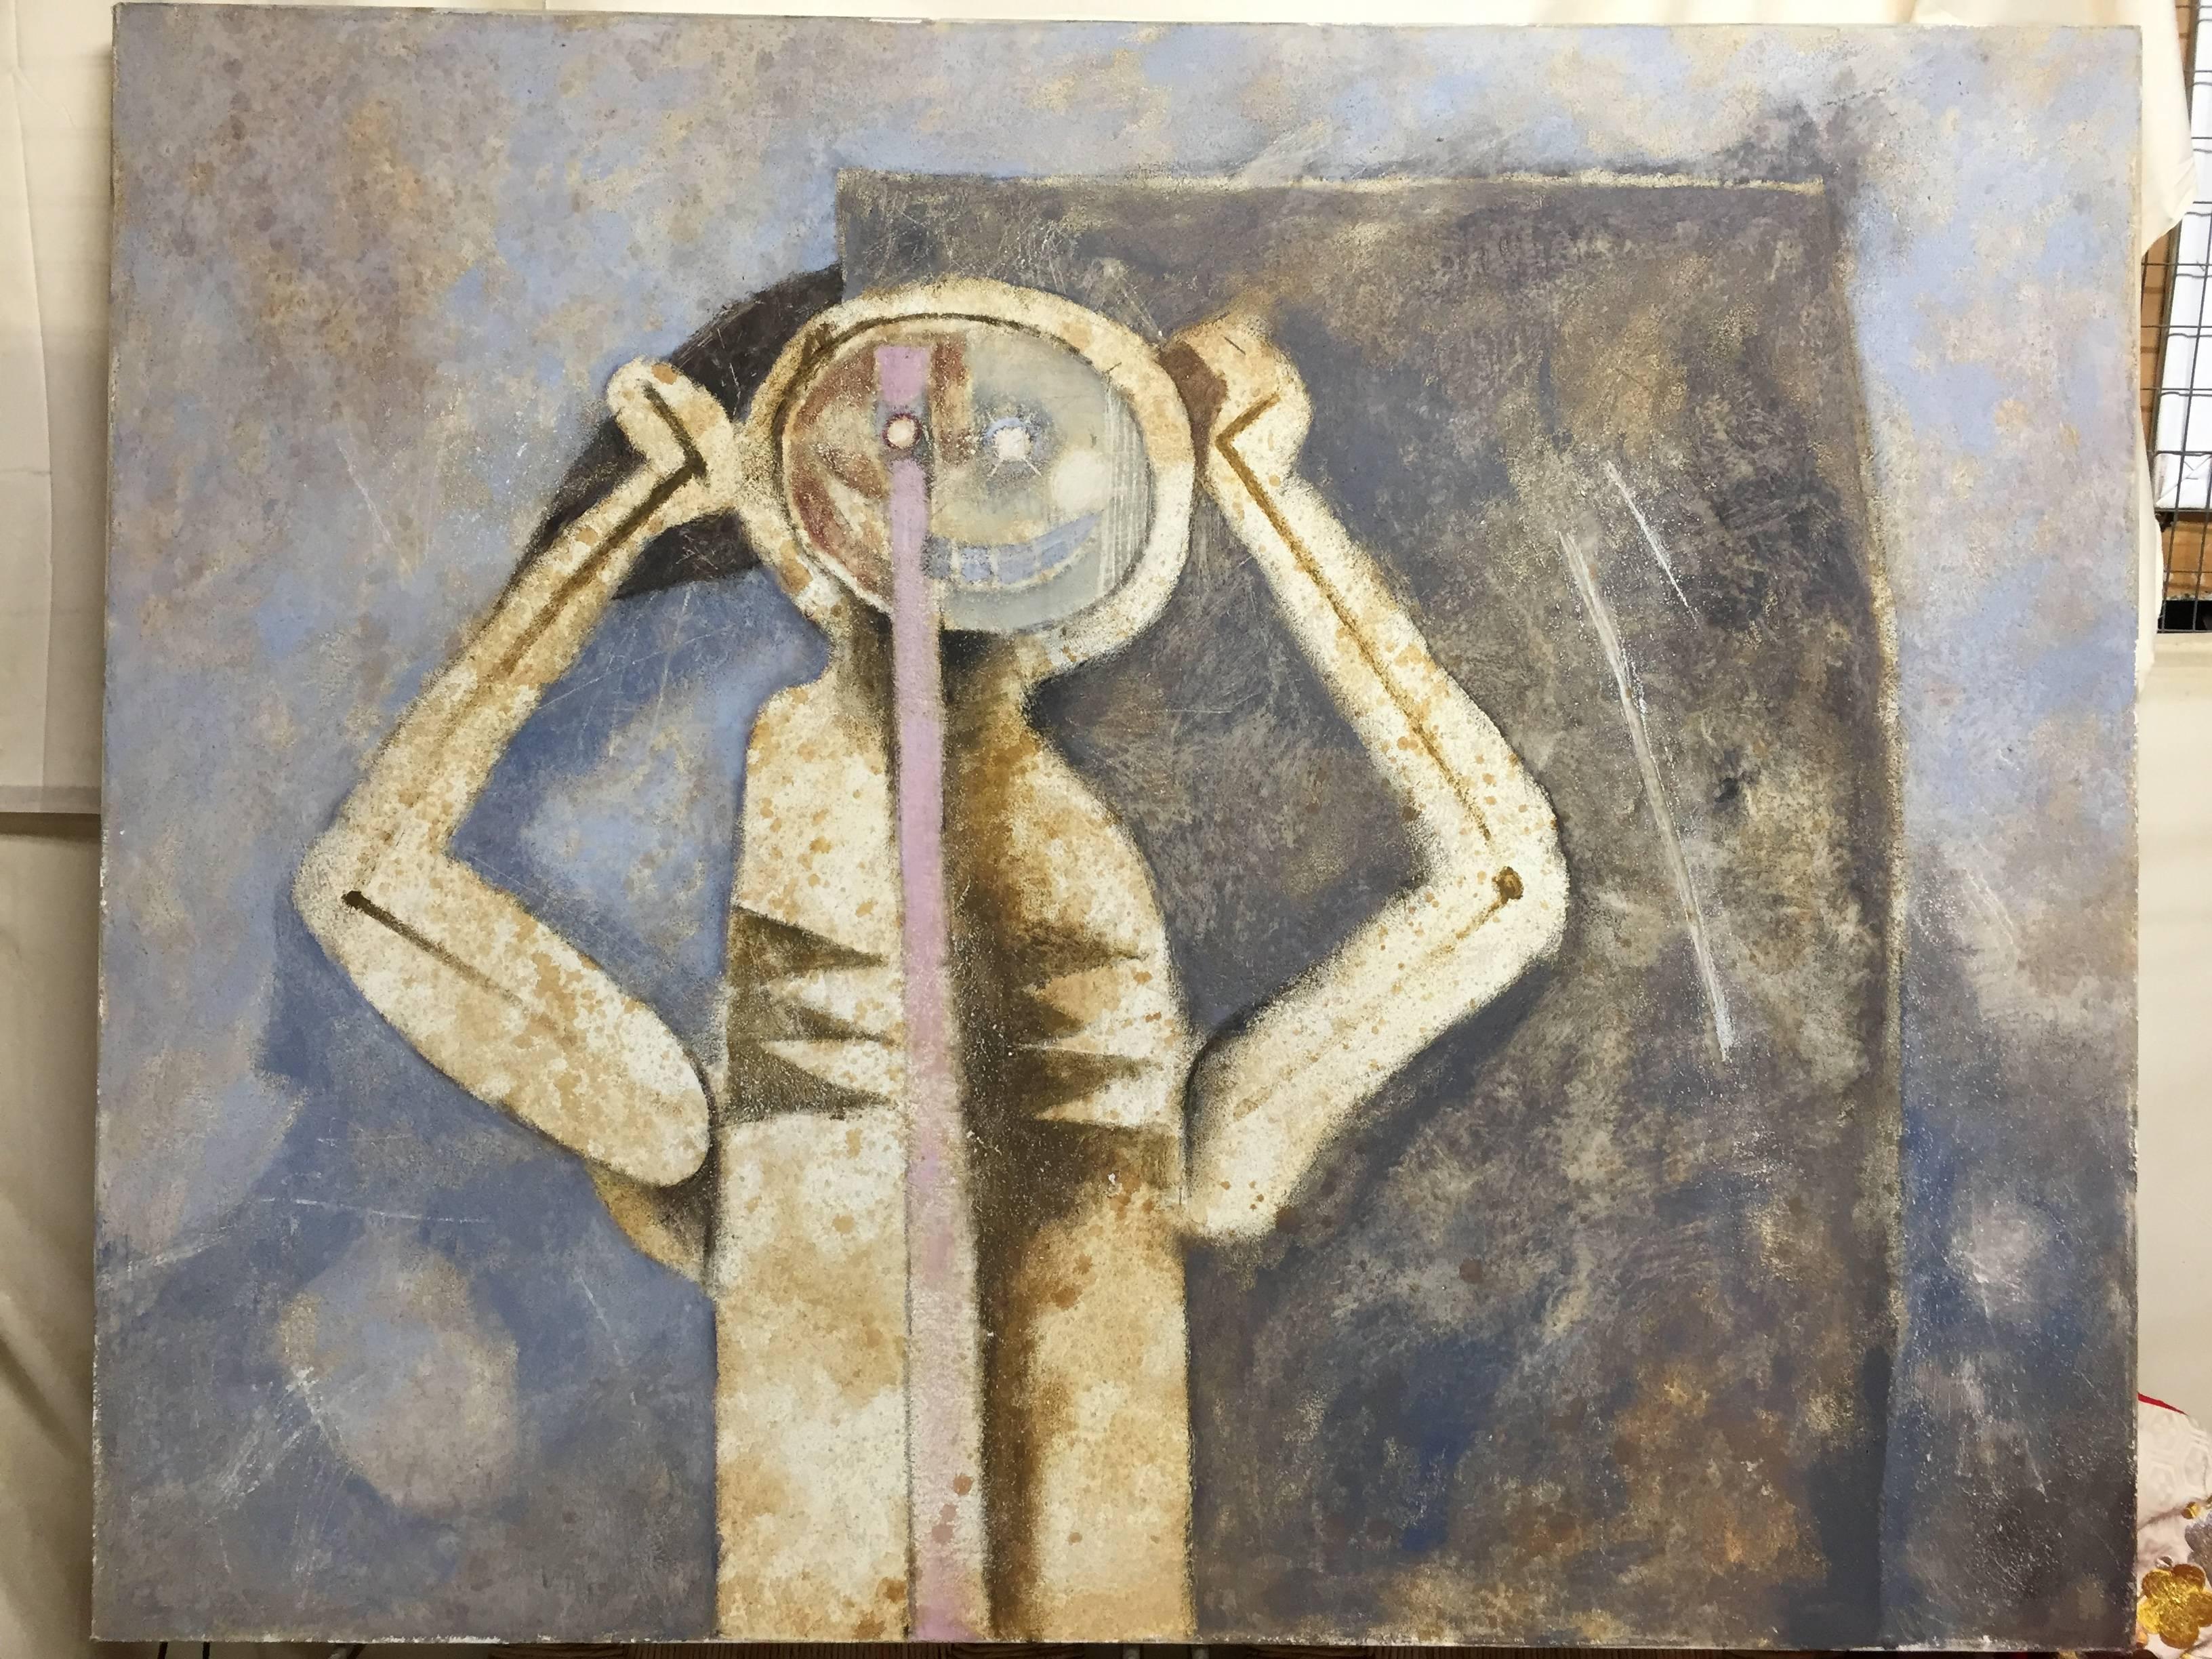 An Unsigned Modern Painting in the style of the Mexican Artist Rufino Tamayo, 20th century. Using Sand Incorporated with Paint Rufino Tamayo mastered this Art Technique. His work was Surreal  and Alien-Like in his Depiction of the Human Form.This